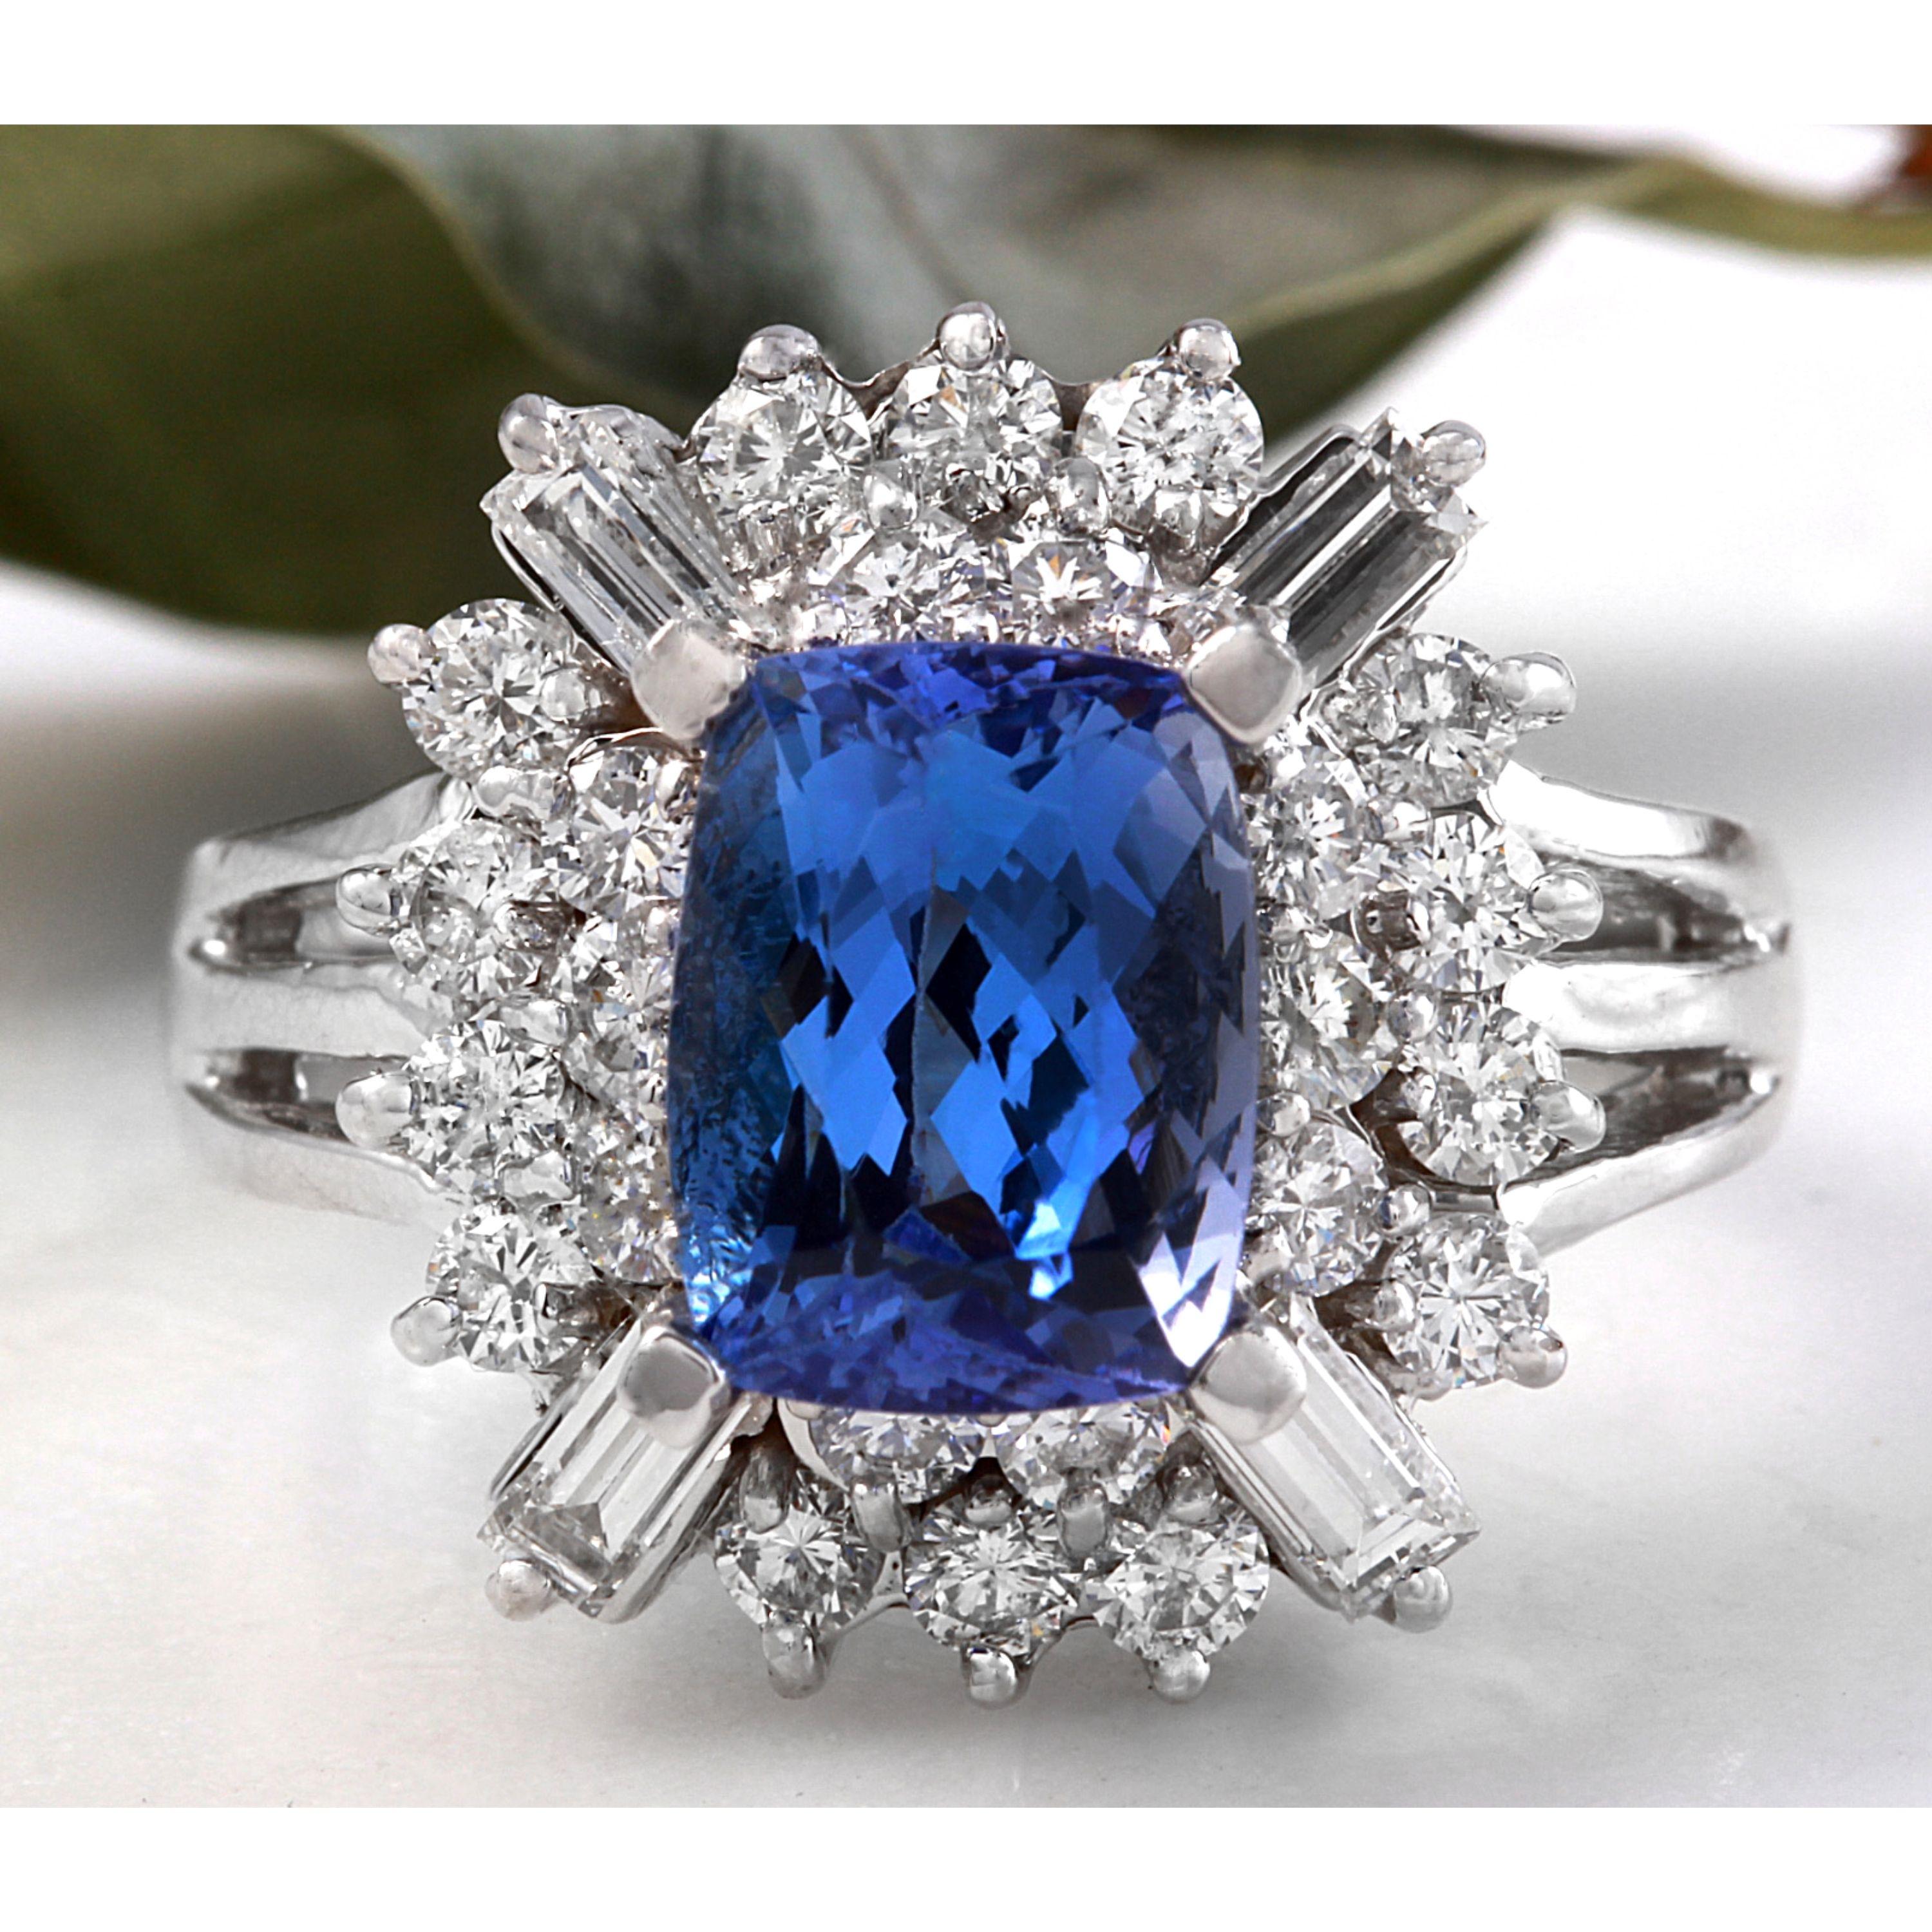 3.80 Carats Natural Very Nice Looking Tanzanite and Diamond 14K Solid White Gold Ring

Total Natural Cushion Cut Tanzanite Weight is: Approx. 2.50 Carats

Tanzanite Measures: Approx. 8.00 x 6.00mm

Tanzanite Treatment: Heat

Natural Round Diamonds